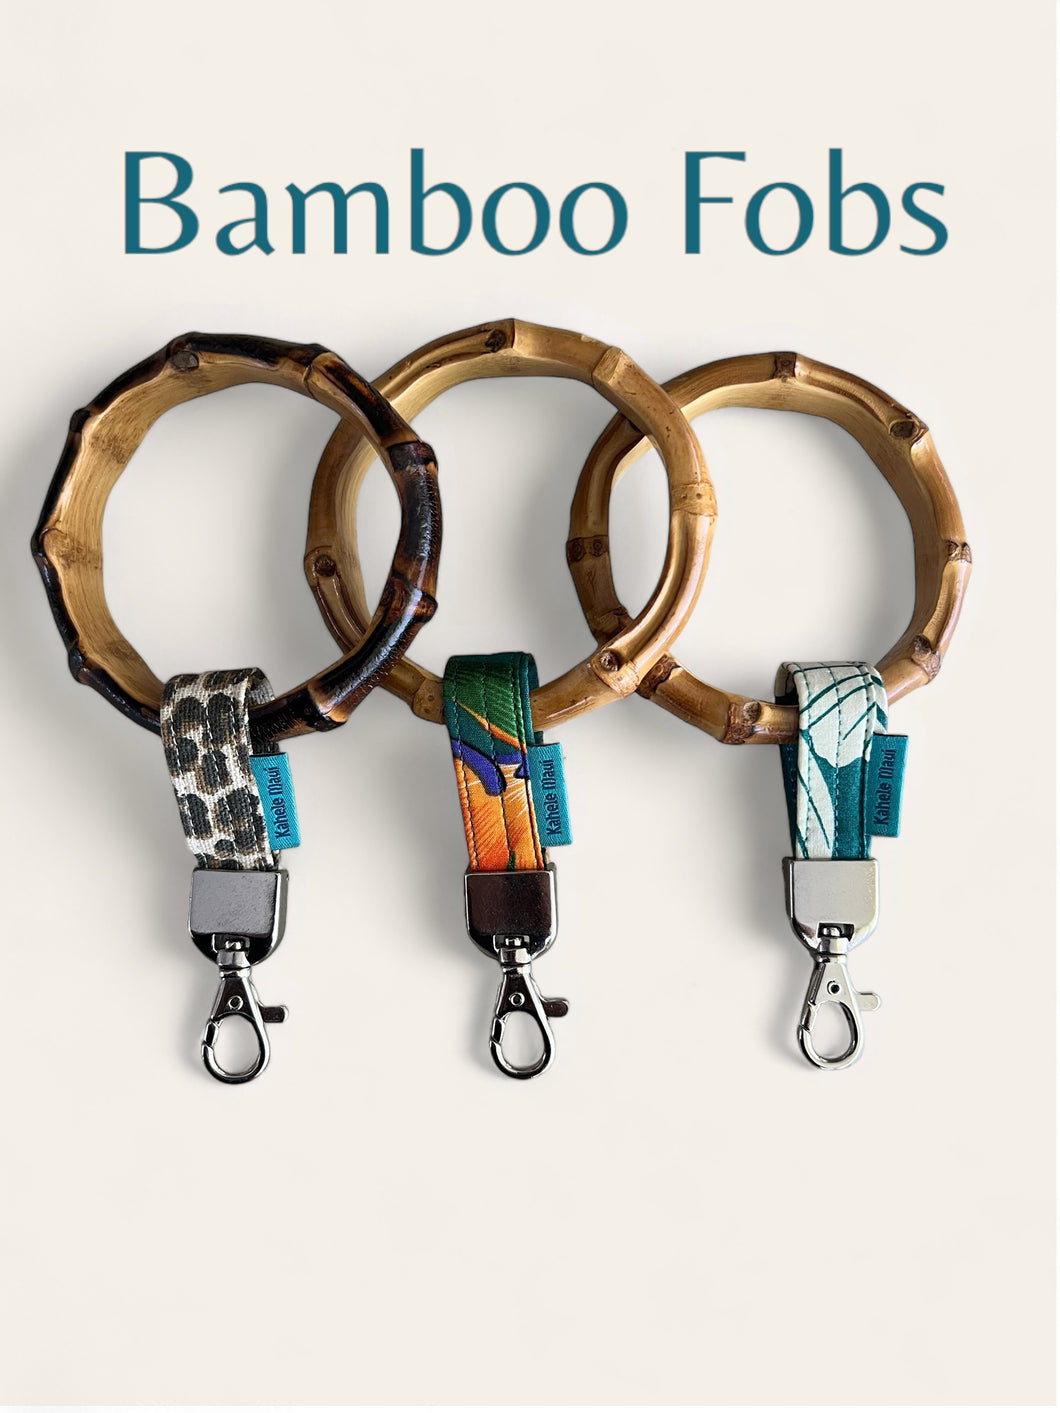 Bamboo Fobs